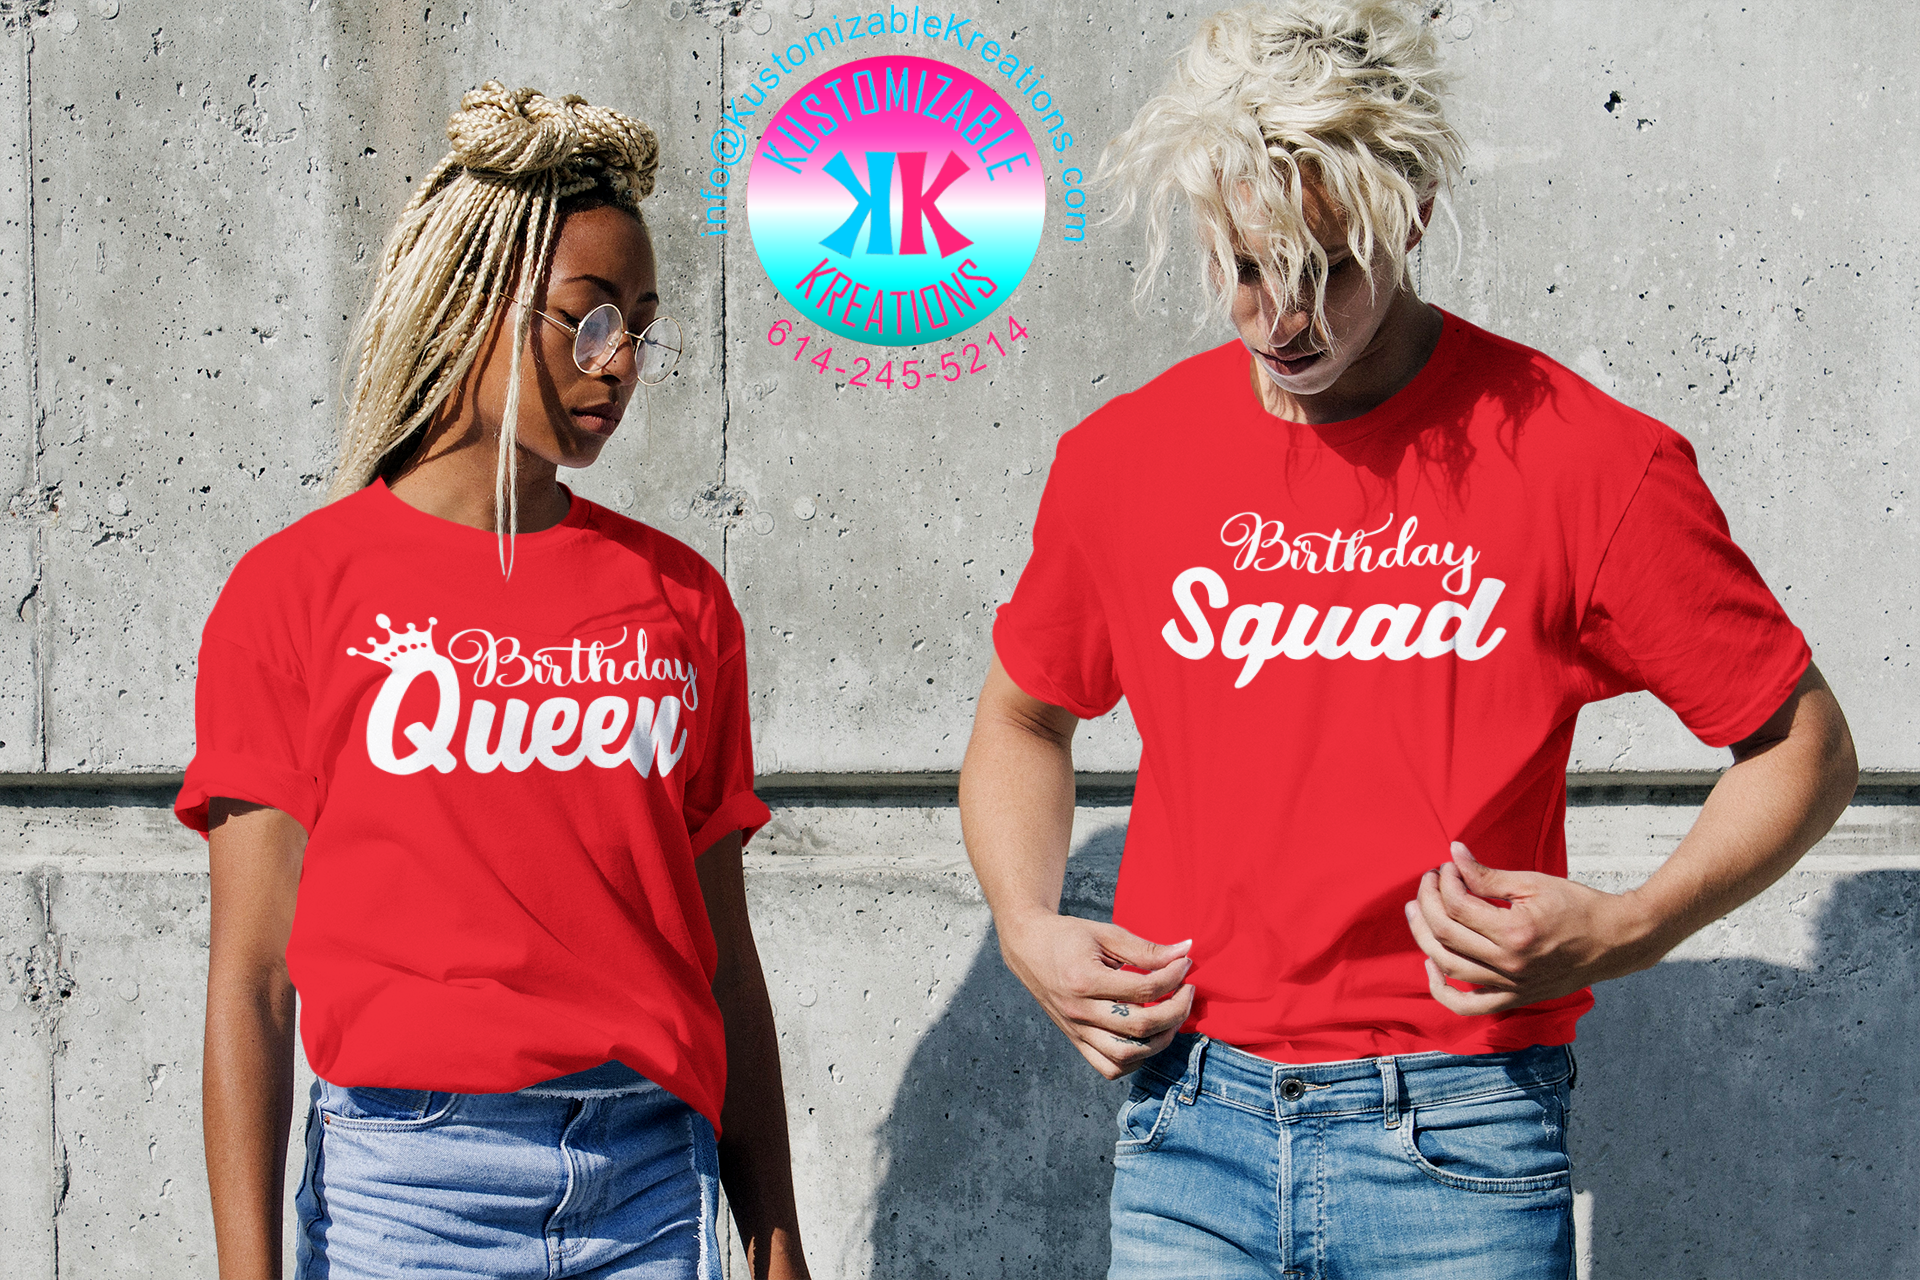 Birthday Queen and Squad t-shirts